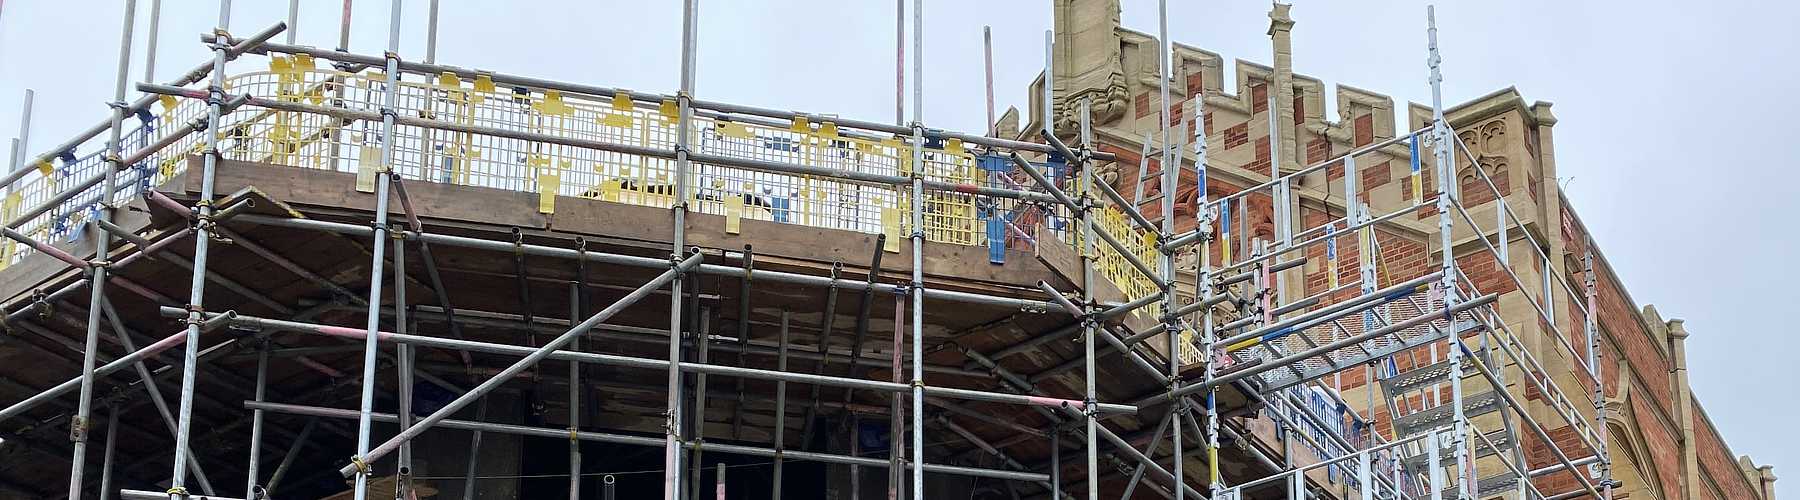 Professional contract and commercial scaffolding Berkshire, Buckinghamshire, Warwickshire